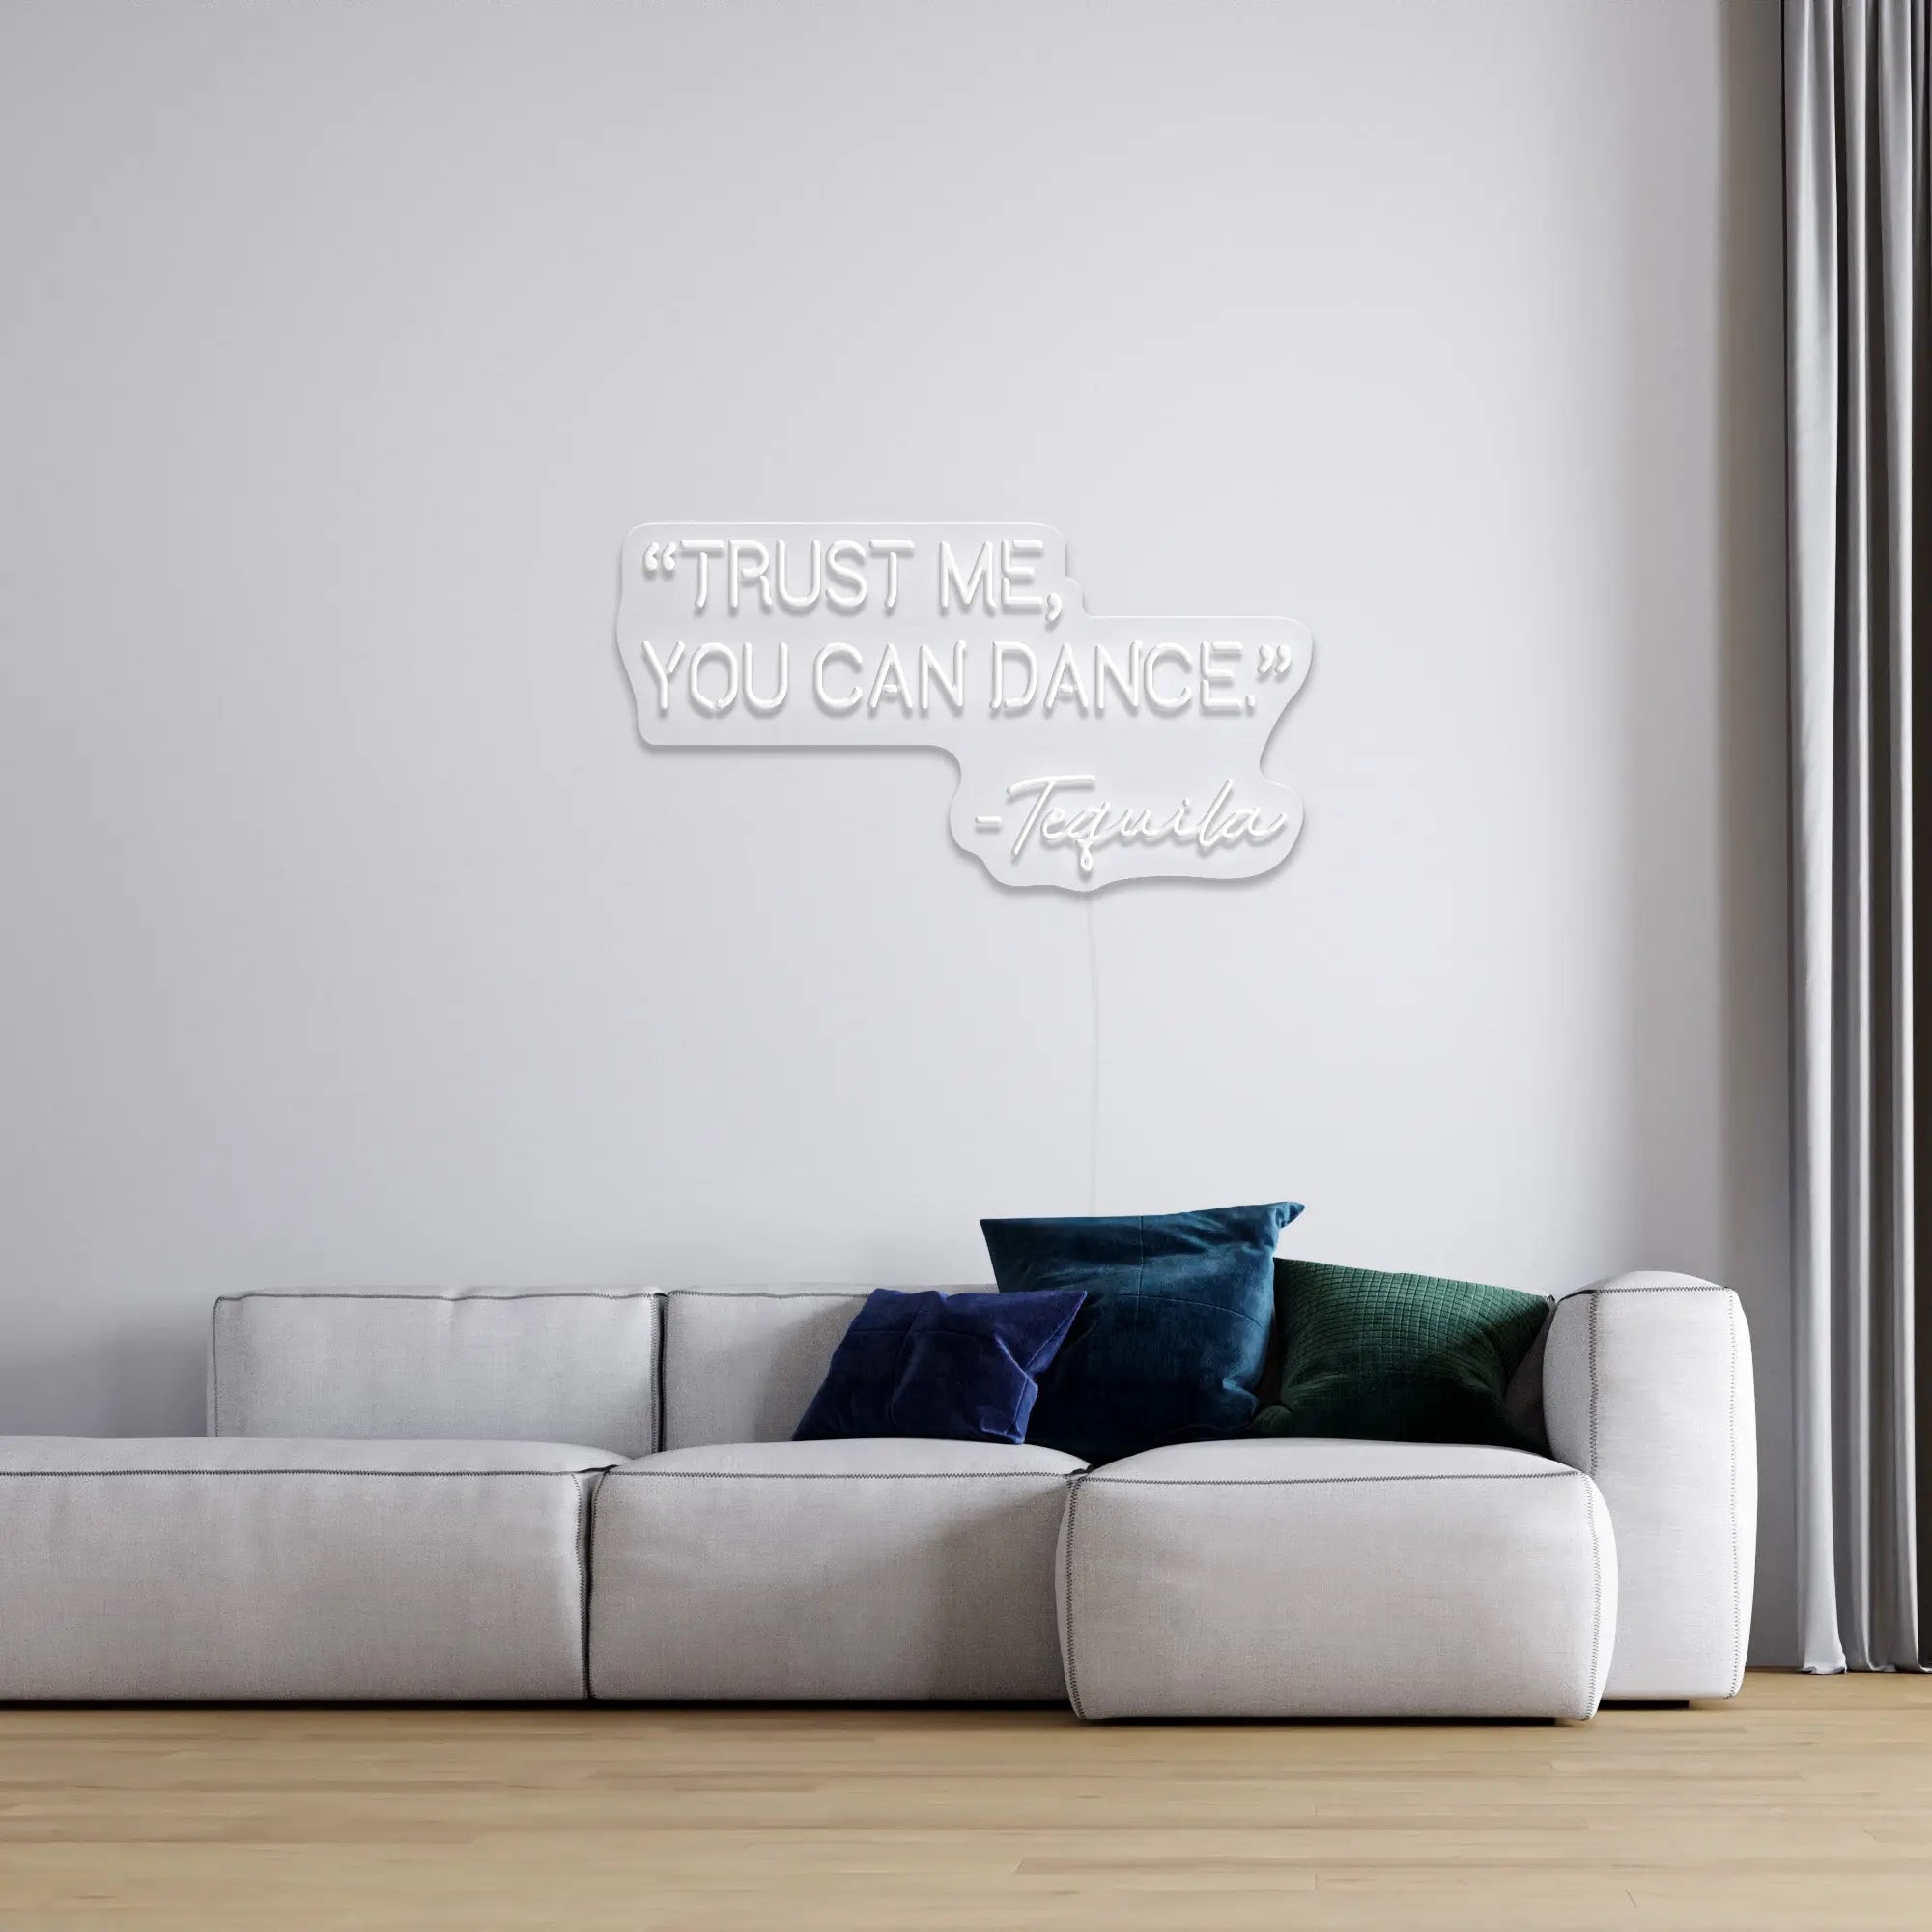 'You Can Dance' LED Neon Sign - neonaffair